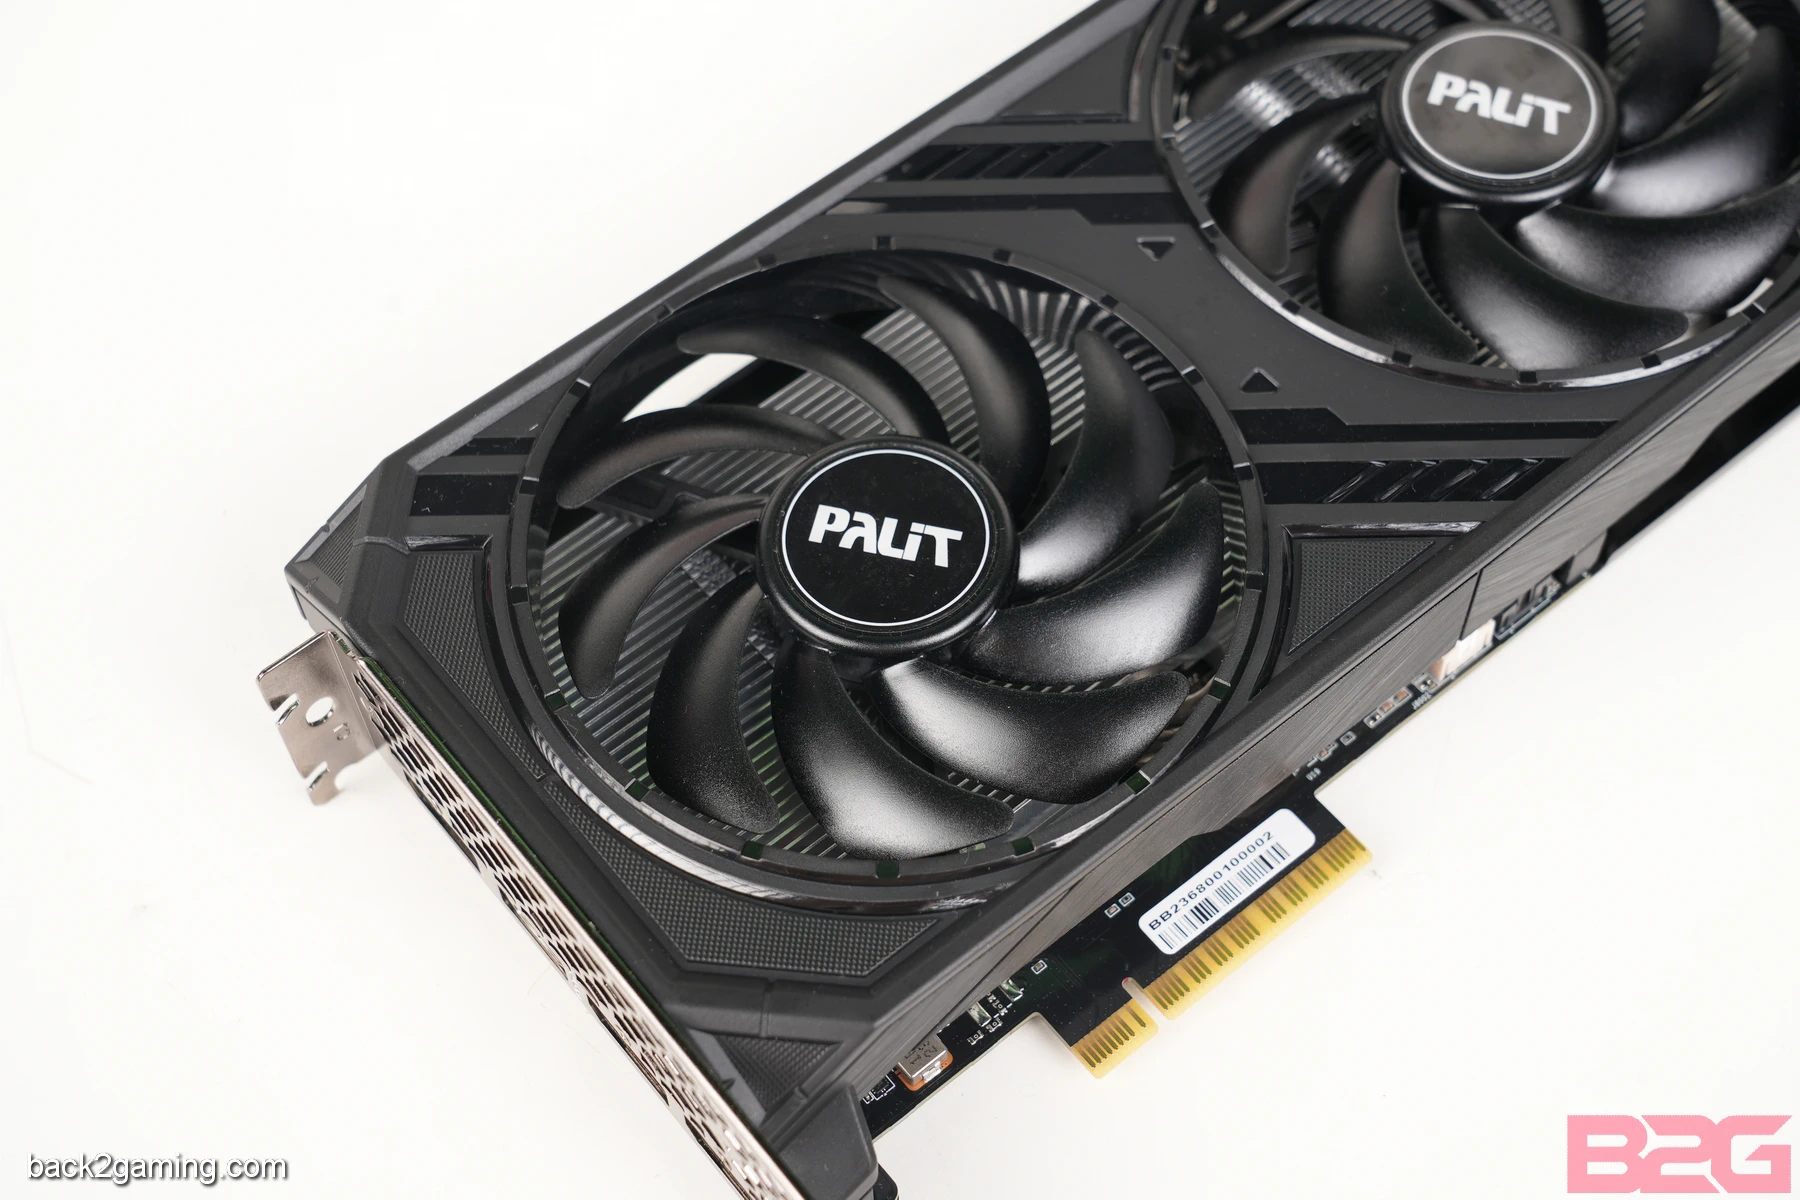 PALIT RTX 4060 DUAL 8GB Graphics Card Review | Back2Gaming